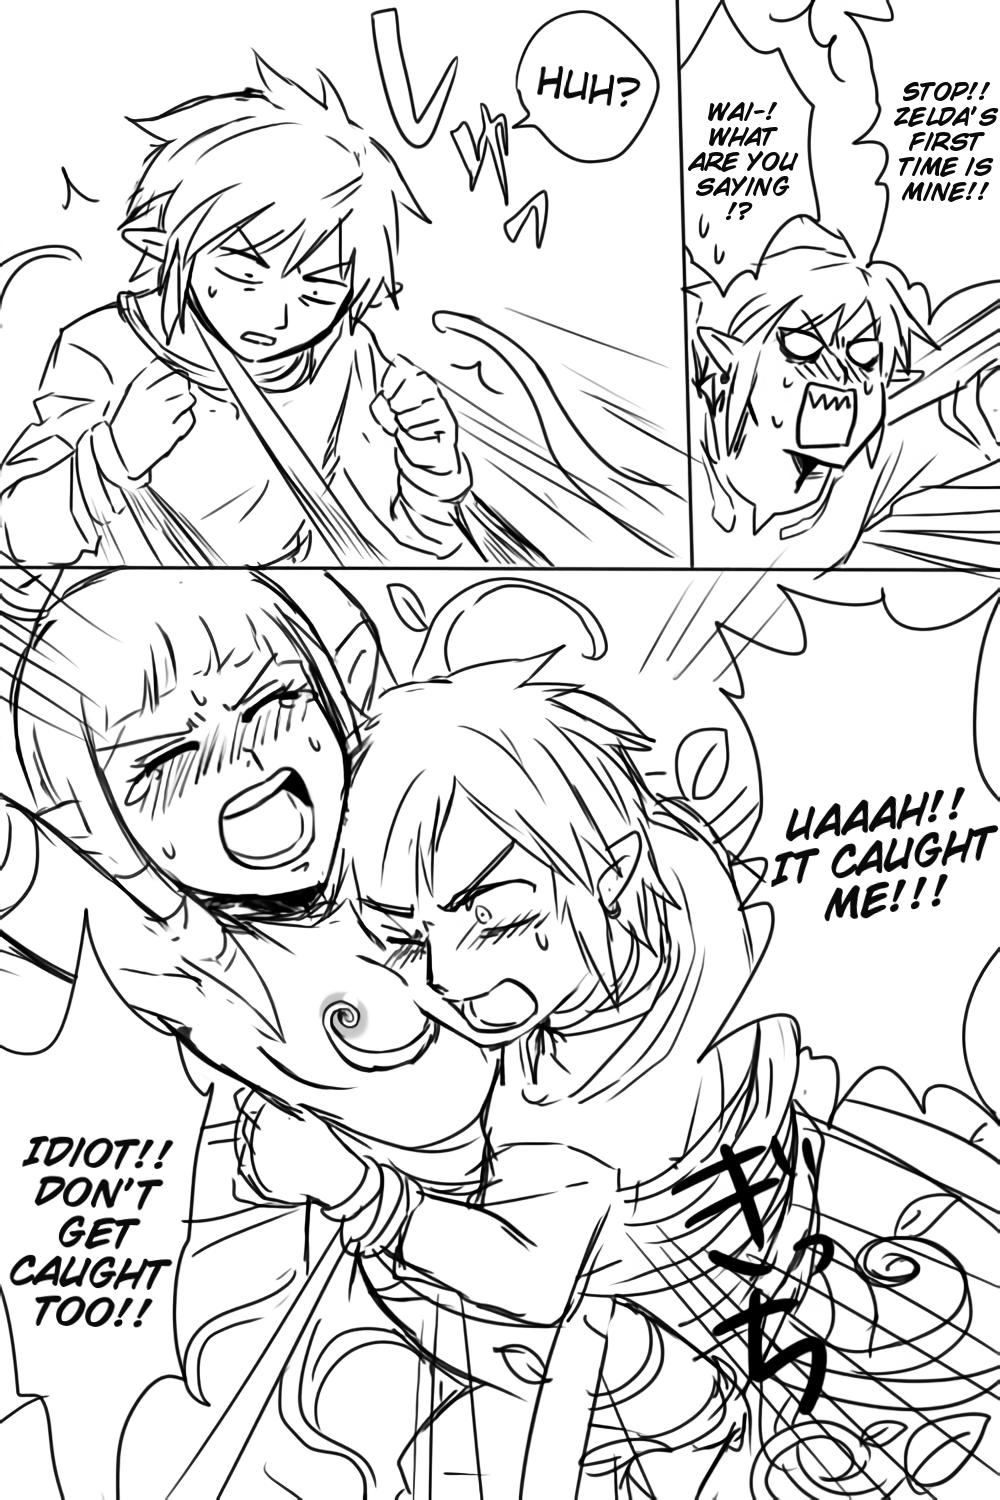 Glamcore Kiss no Mae ni | Before the kiss - The legend of zelda Femdom Porn - Page 7